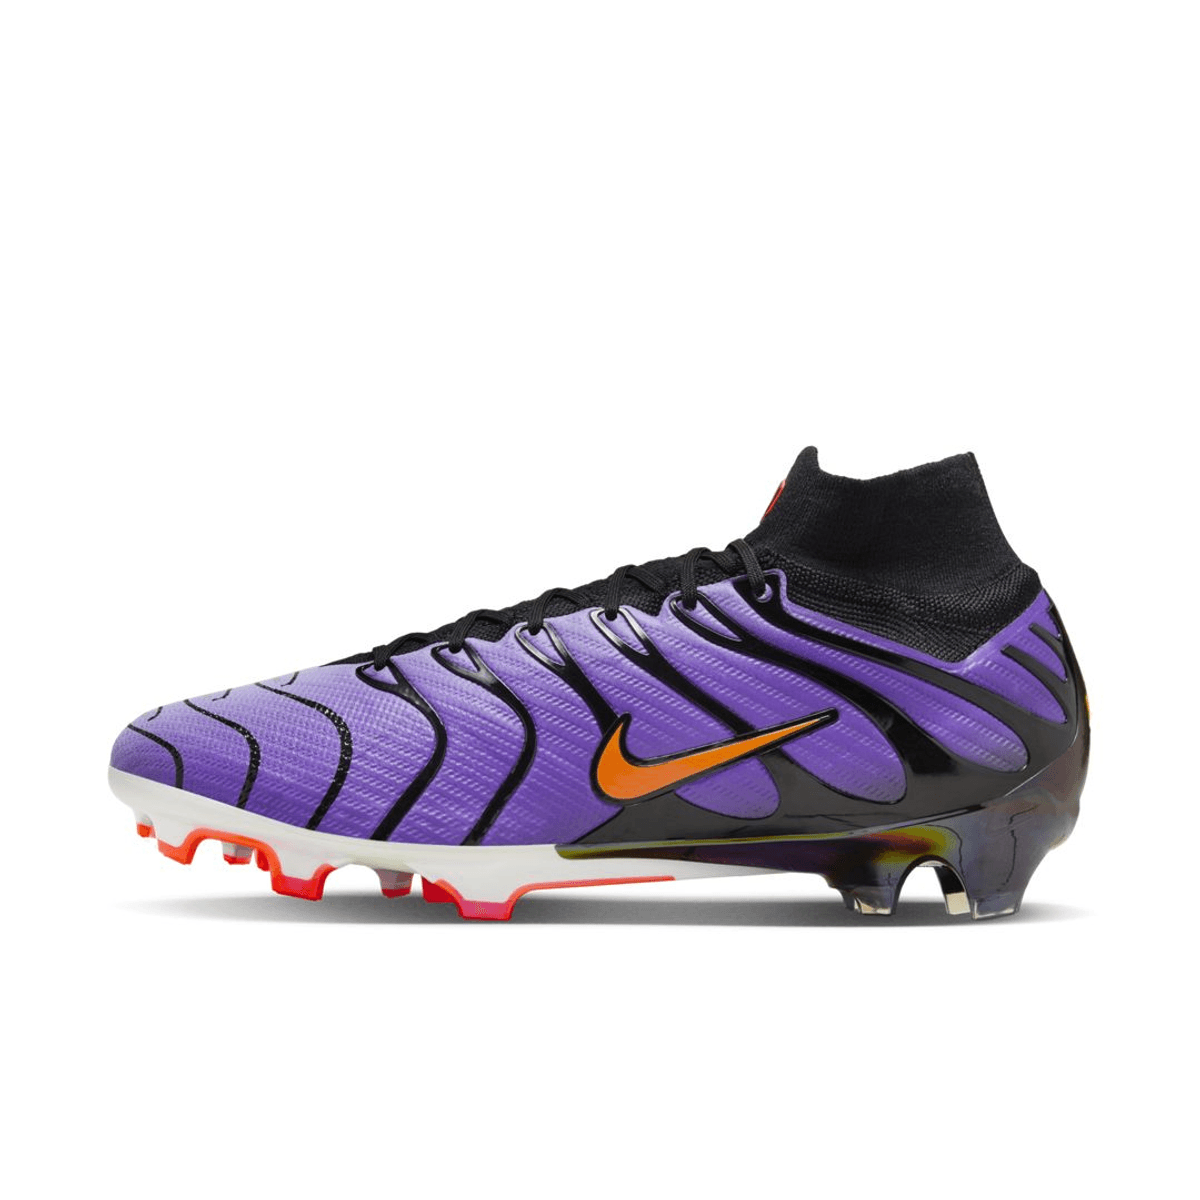 Official Images Of The Nike Mercurial Superfly 9 FG “Voltage Purple”